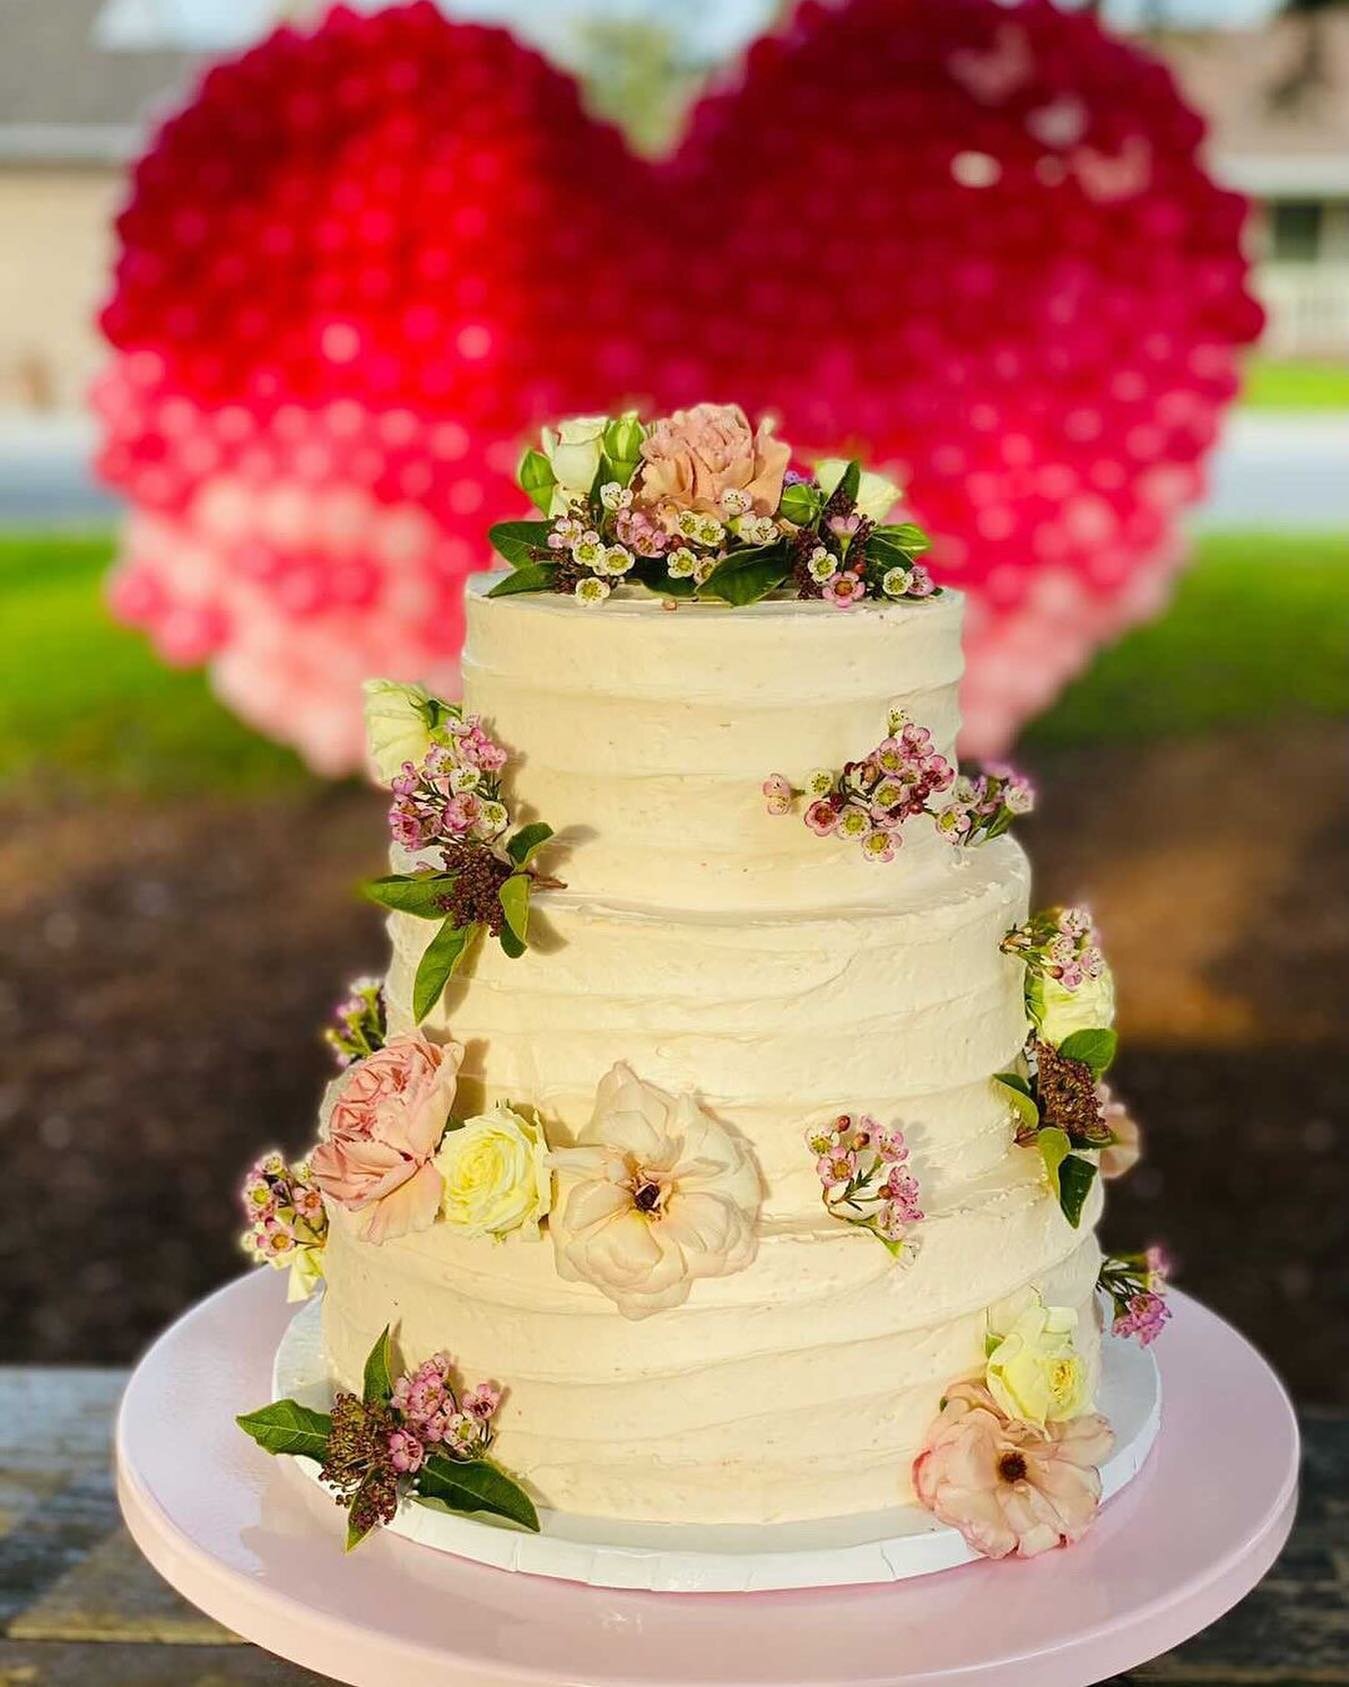 We did the funnest cake today! This boho floral birthday cake complete with fresh flowers from @floranfauna2! Vanilla Cake with fresh strawberries in the center! We love when our customers challenge us to do interesting designs! #happybirthday #cotta